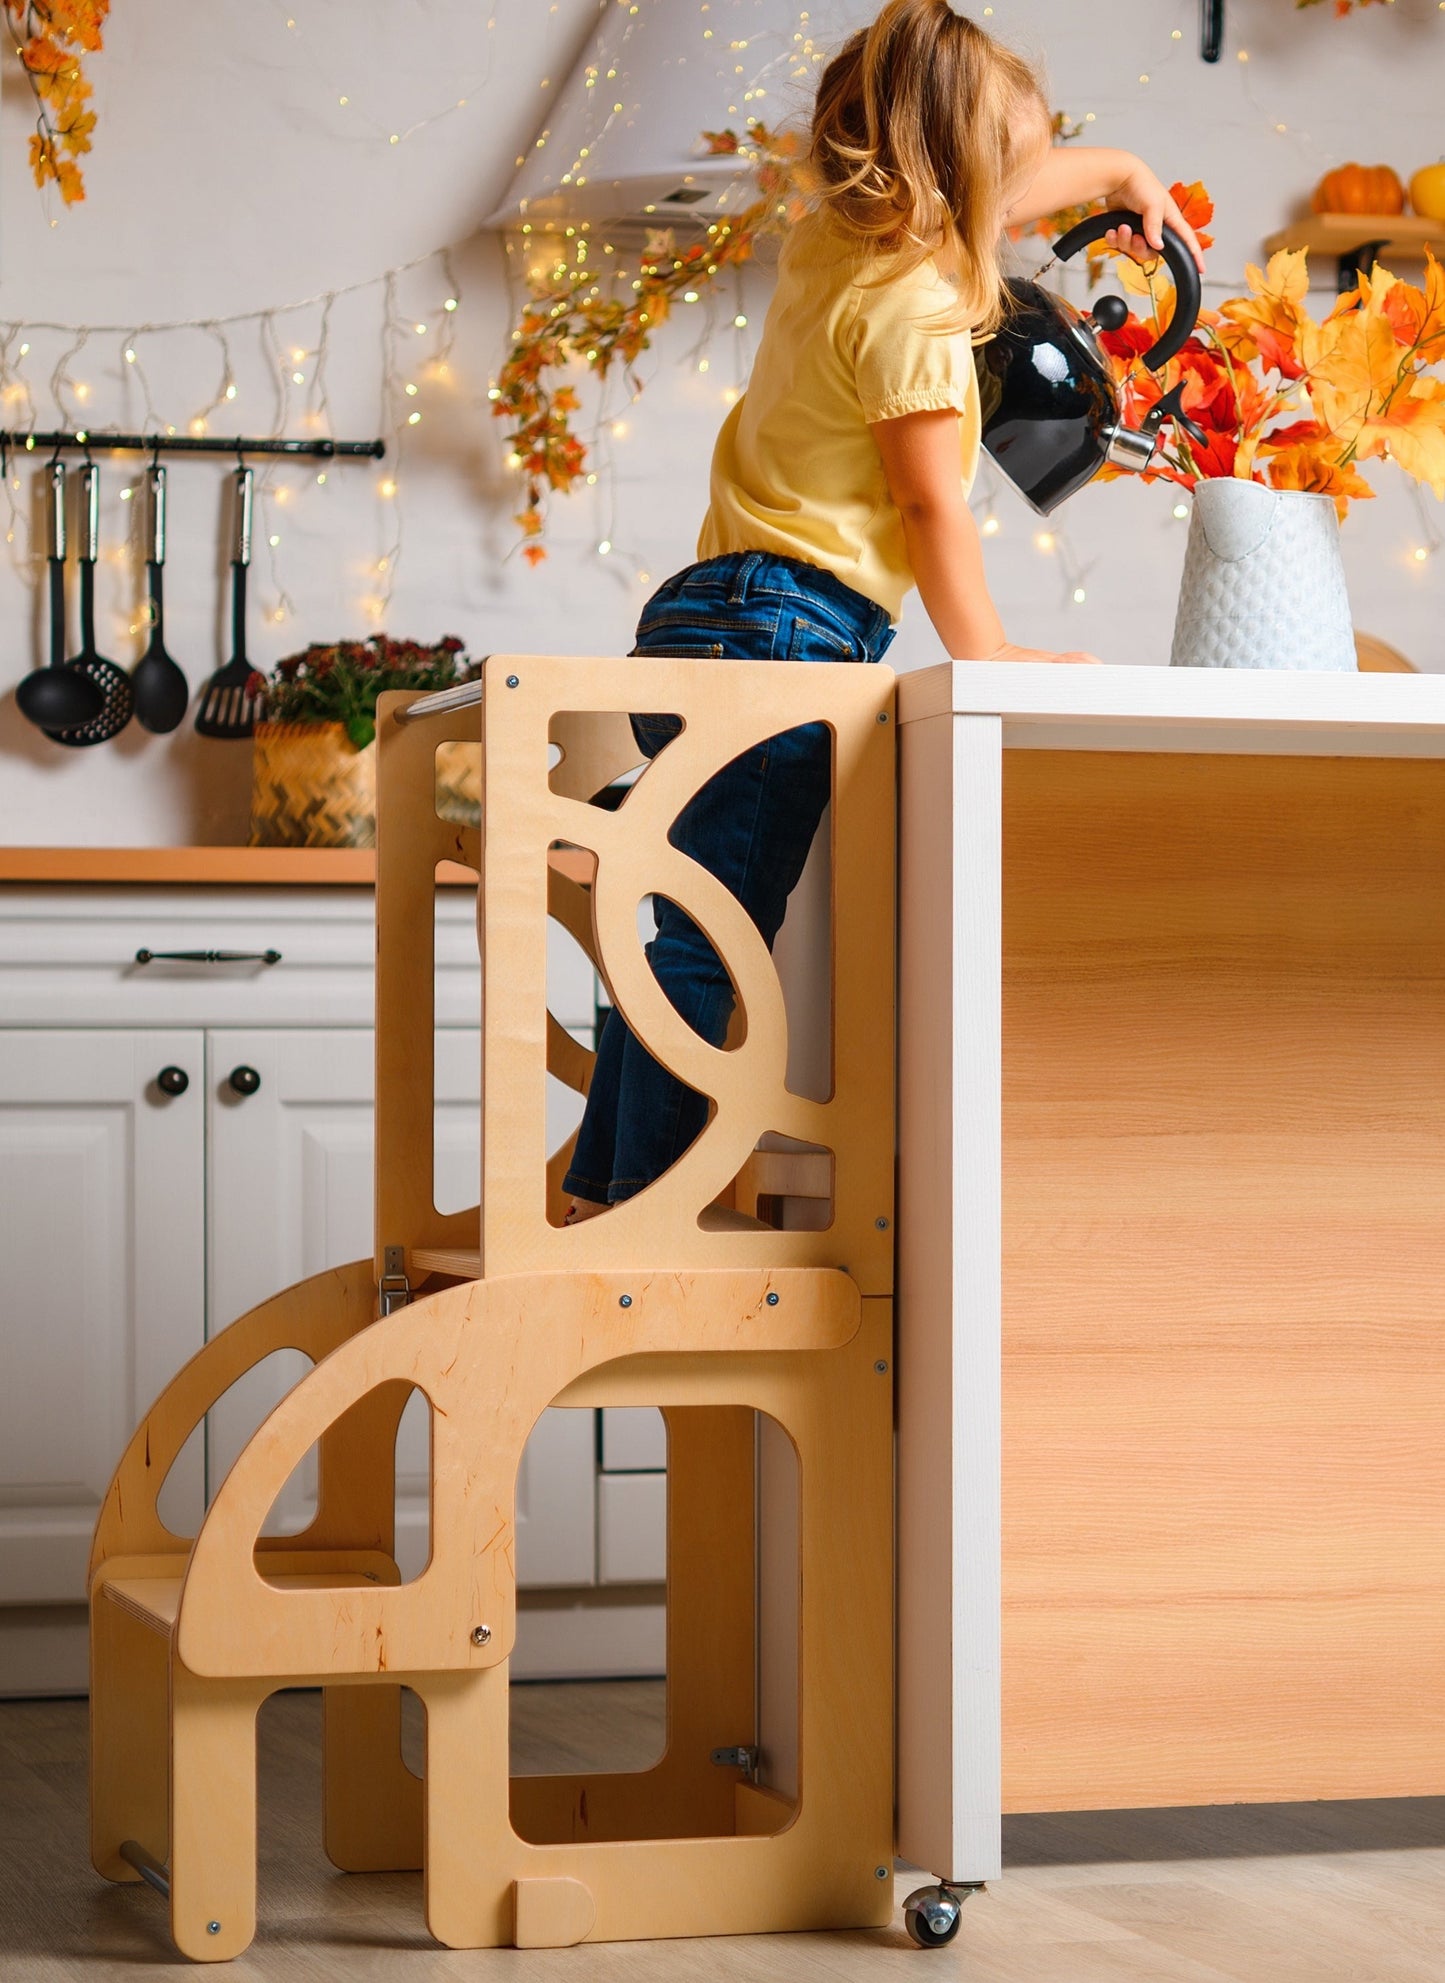 Convertible learning toddler tower & table with a back, toddler kitchen tower - Climbambino